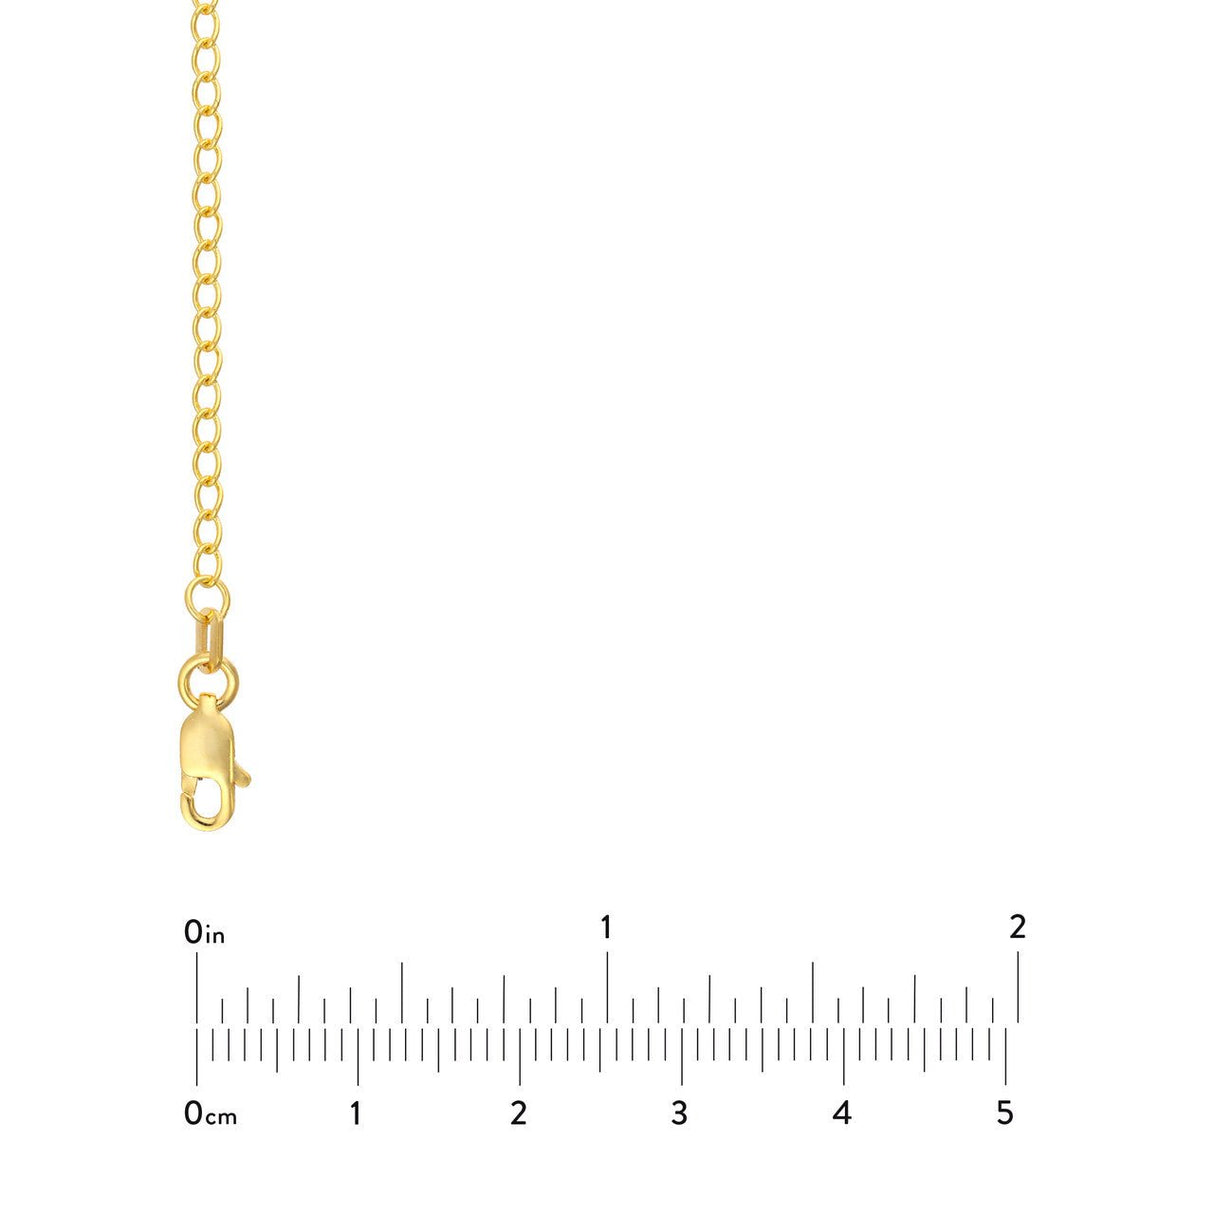 An image capturing the 14K Gold Chain styled with different outfits, underscoring its ability to elevate any ensemble and serve as both a daily accessory and a special occasion statement piece, compare us with zales, compare us with vrai, a clean origin of gold, diamond origin, gold necklaces, gold rope chain, compare us with james allen, compare with brilliant earth,